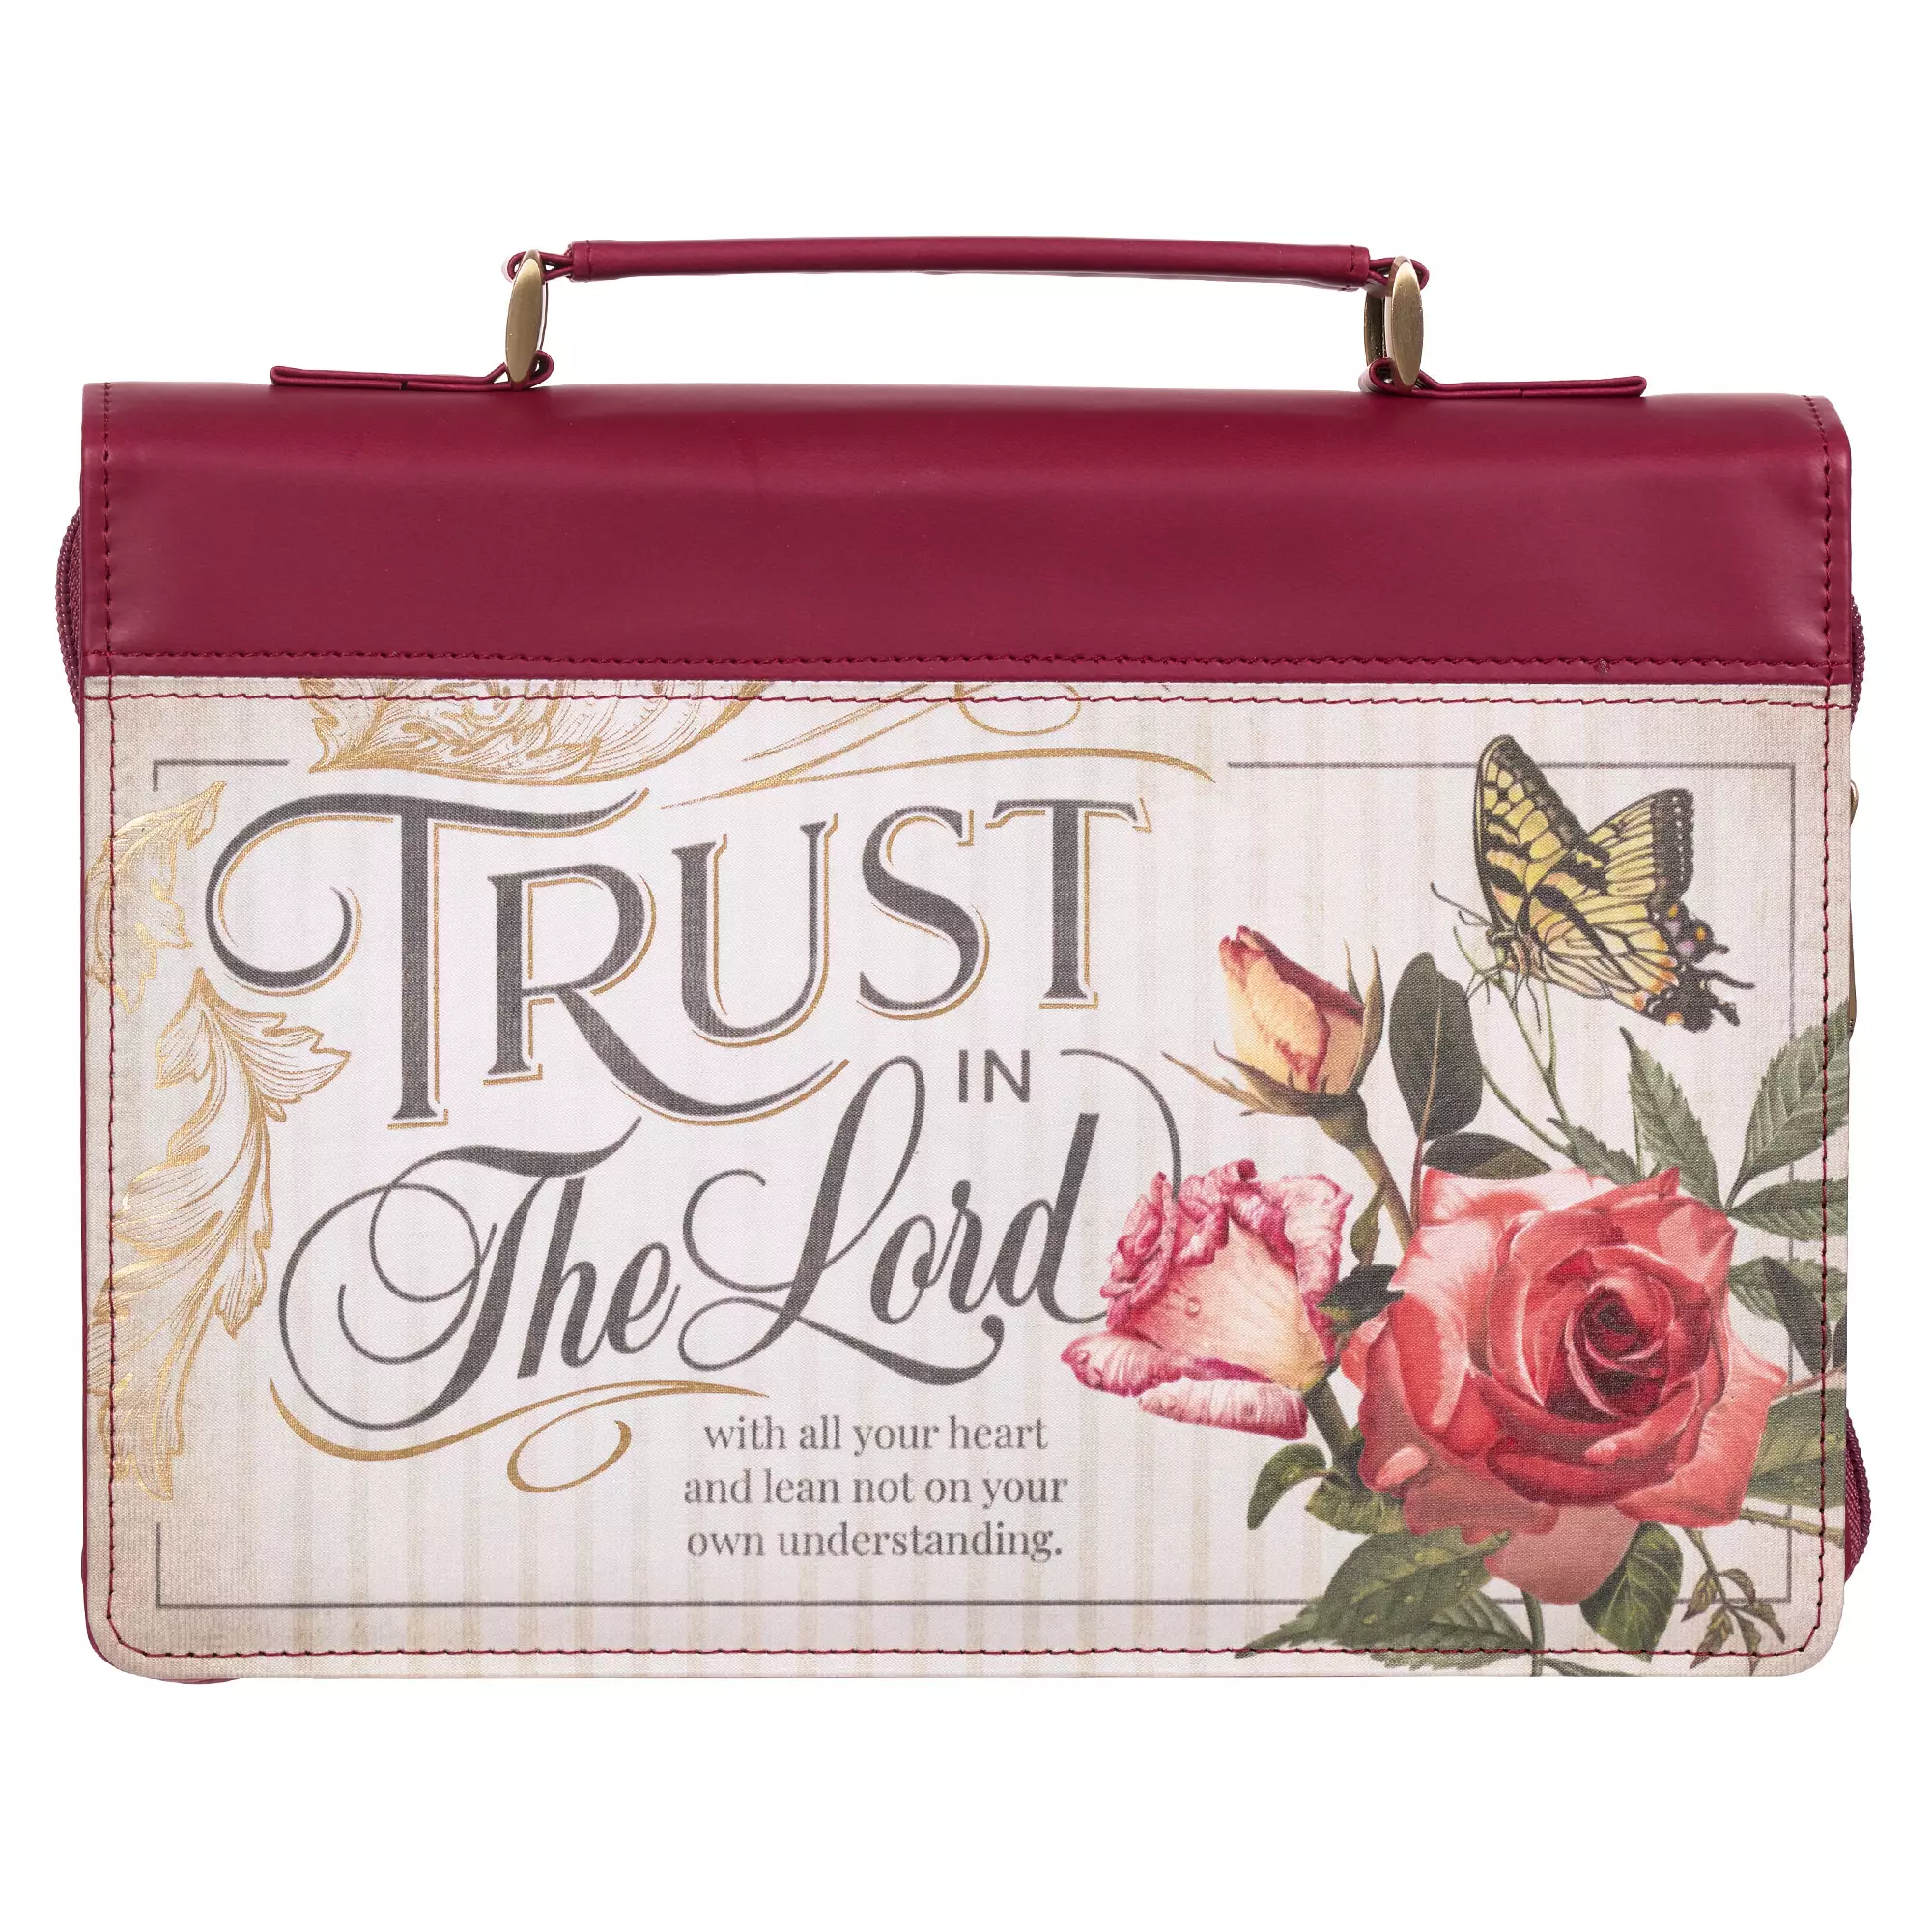 Medium Trust in the Lord Maroon Vintage Red Floral Vegan Leather Fashion Bible Cover - Proverbs 3:5